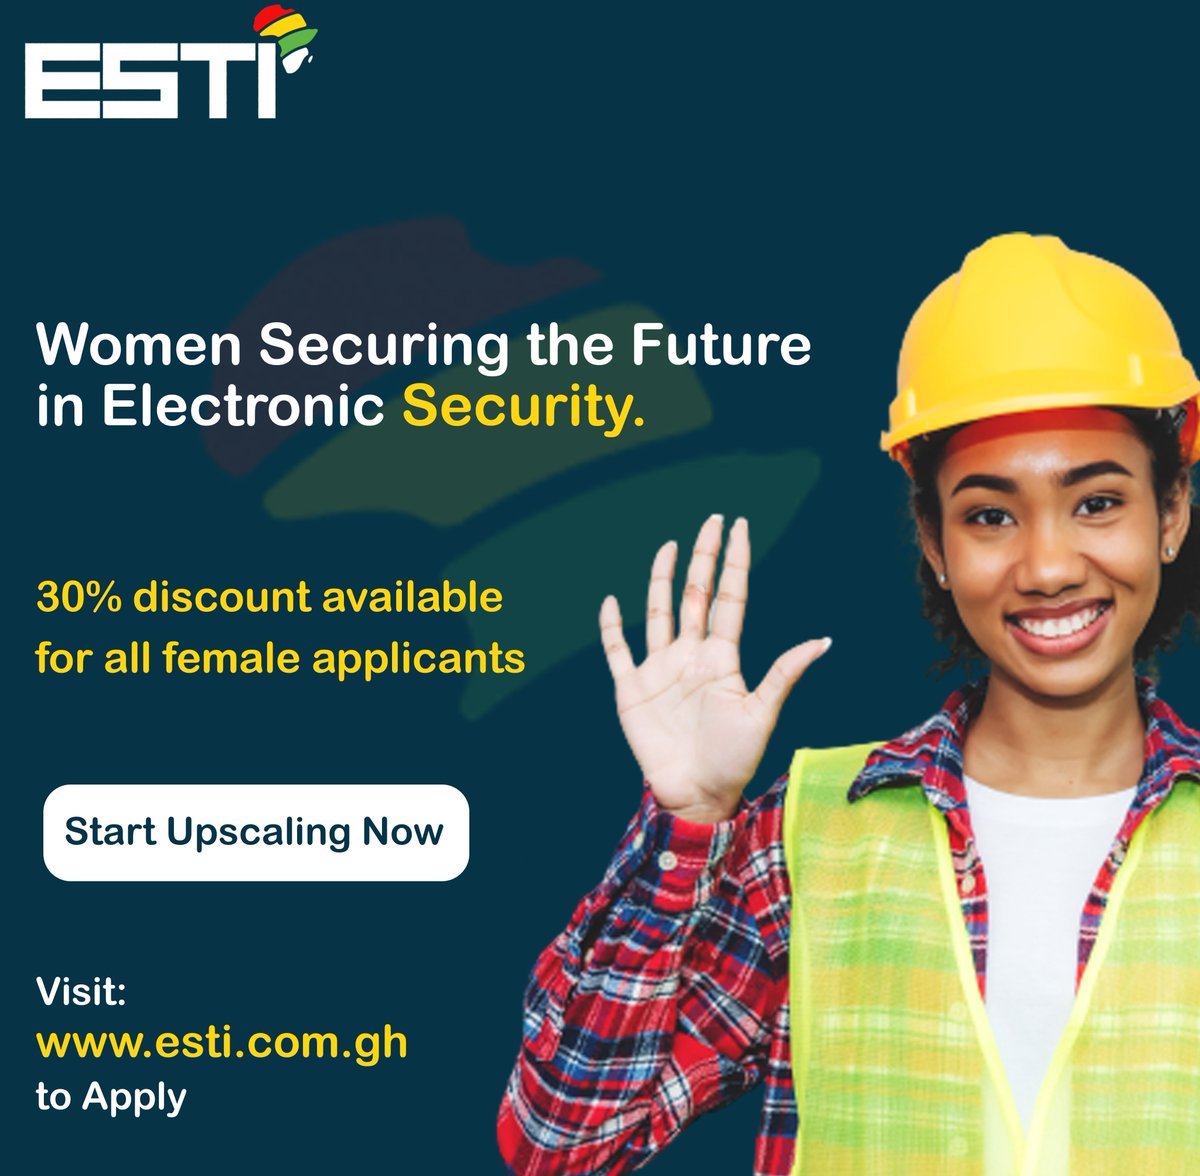 Join us in breaking barriers and forging a path in electronic security. Explore a world of opportunities where women thrive, innovate, and secure the digital landscape.

Apply Now buff.ly/3XF7RFJ

#WomenInTech #WomenInSecurity #CyberSecurity #EmpowerTechWomen